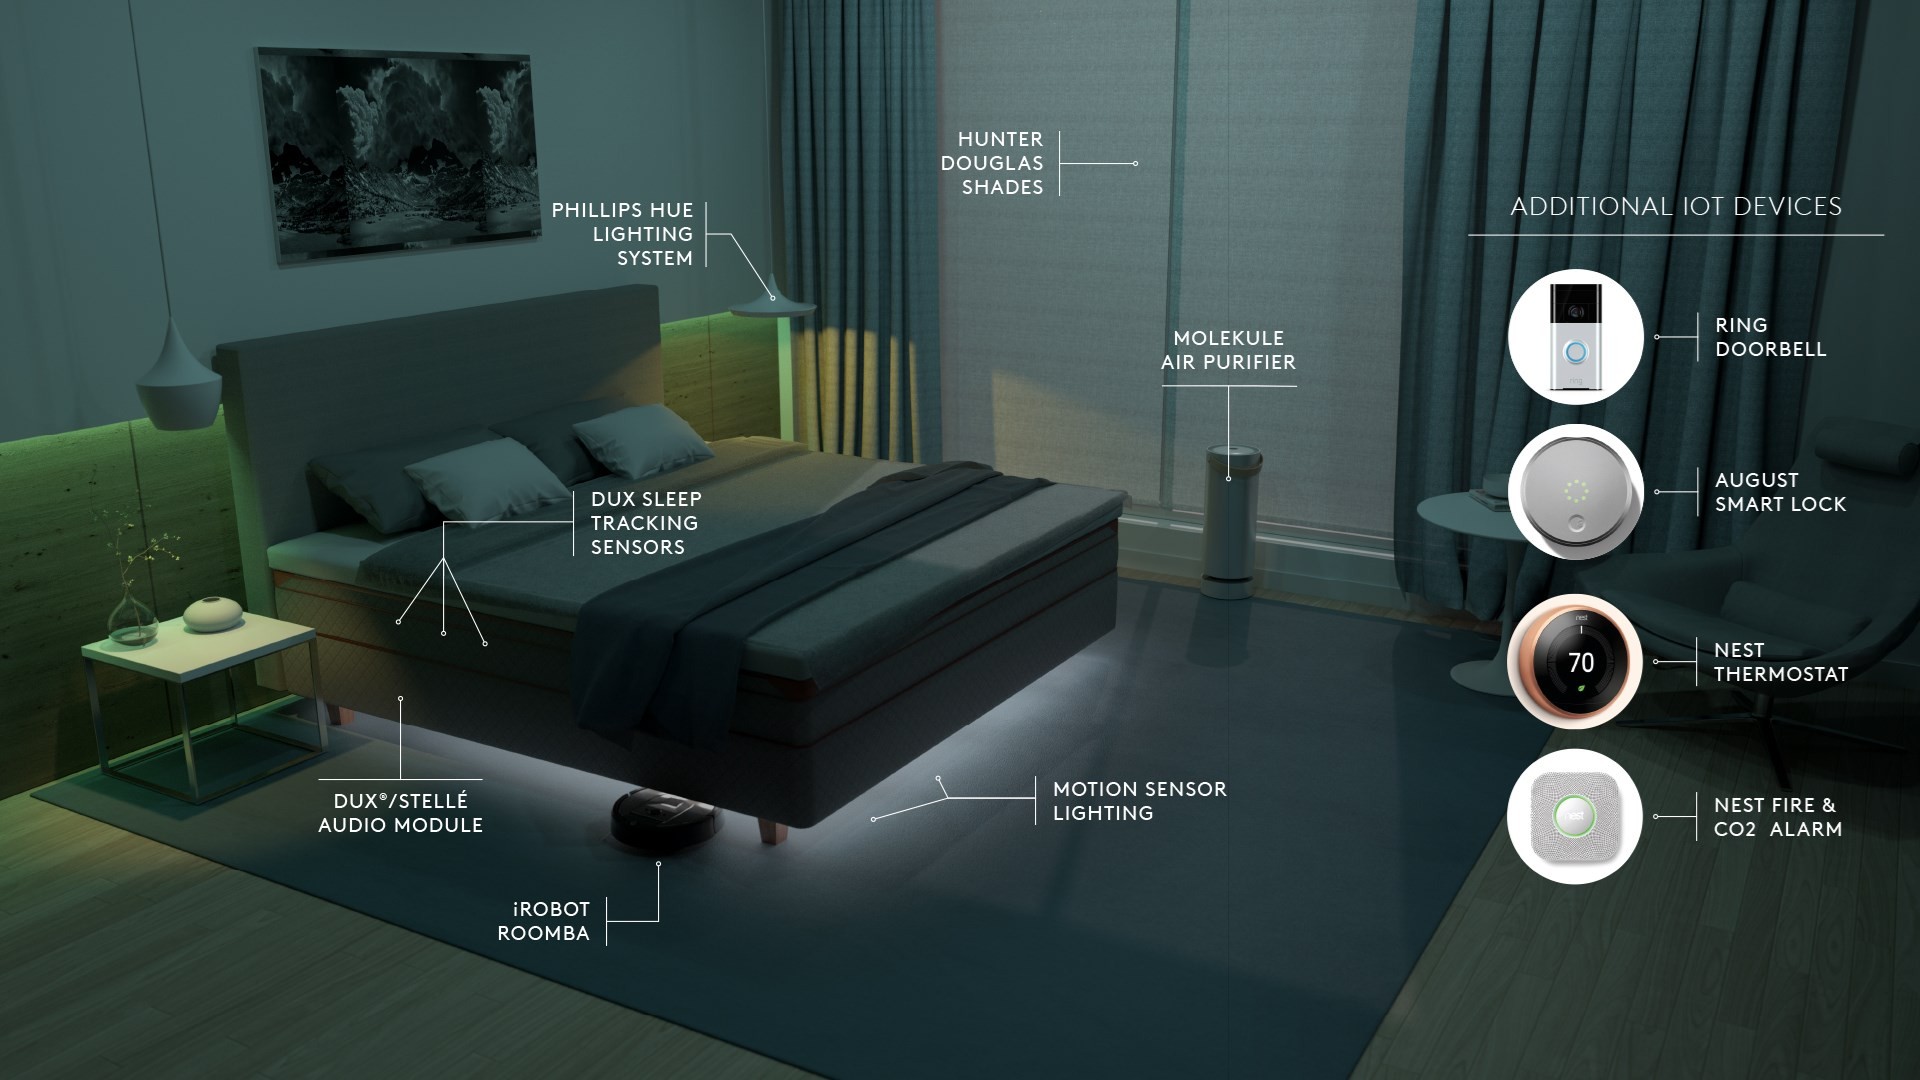 The Alexa-powered bed from DUX, which serves as a bedtime concierge.